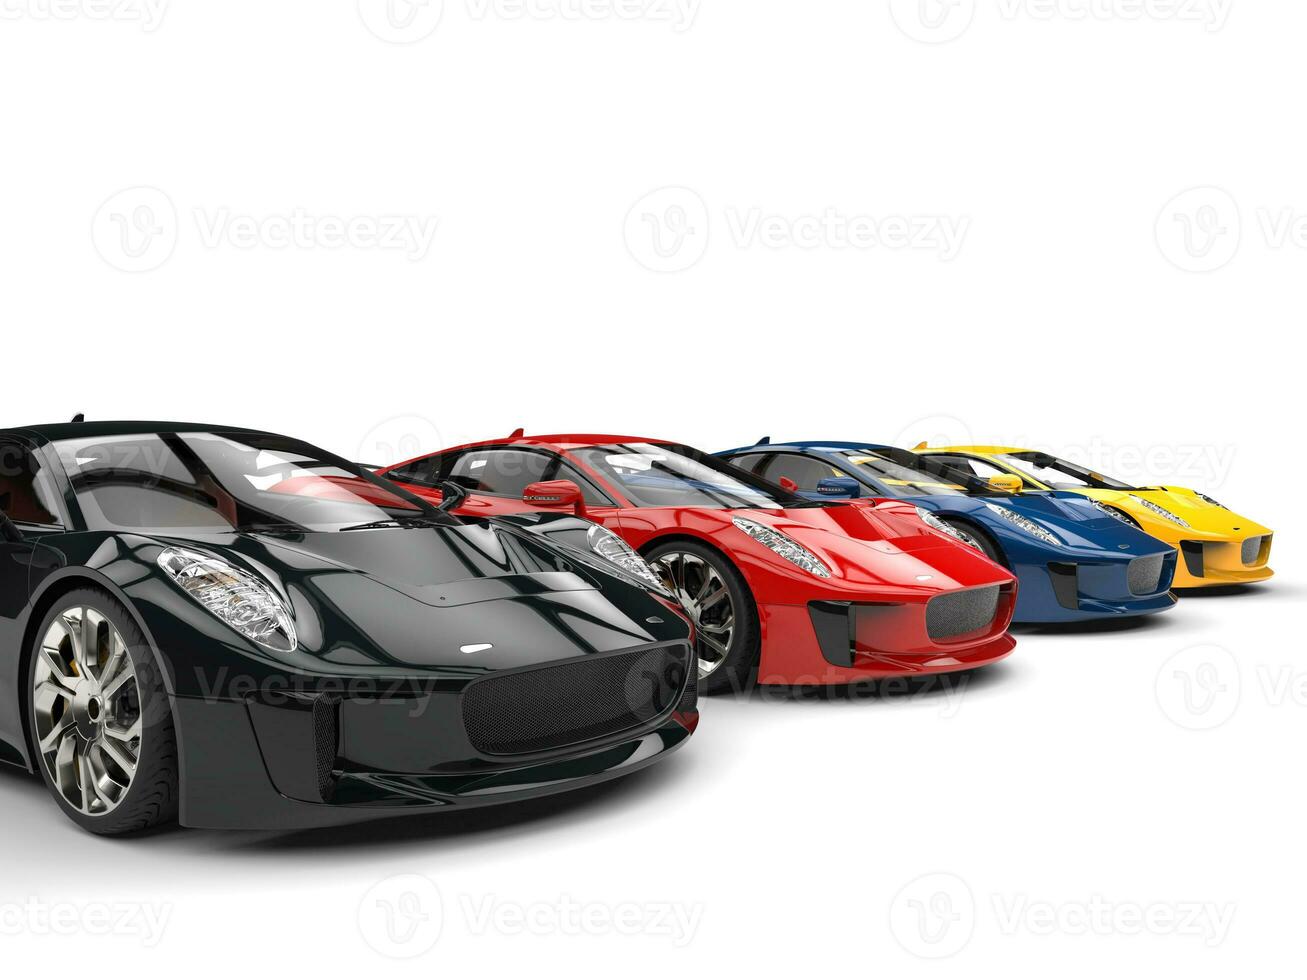 Modenr super sports cars - black, red, blue and yellow photo